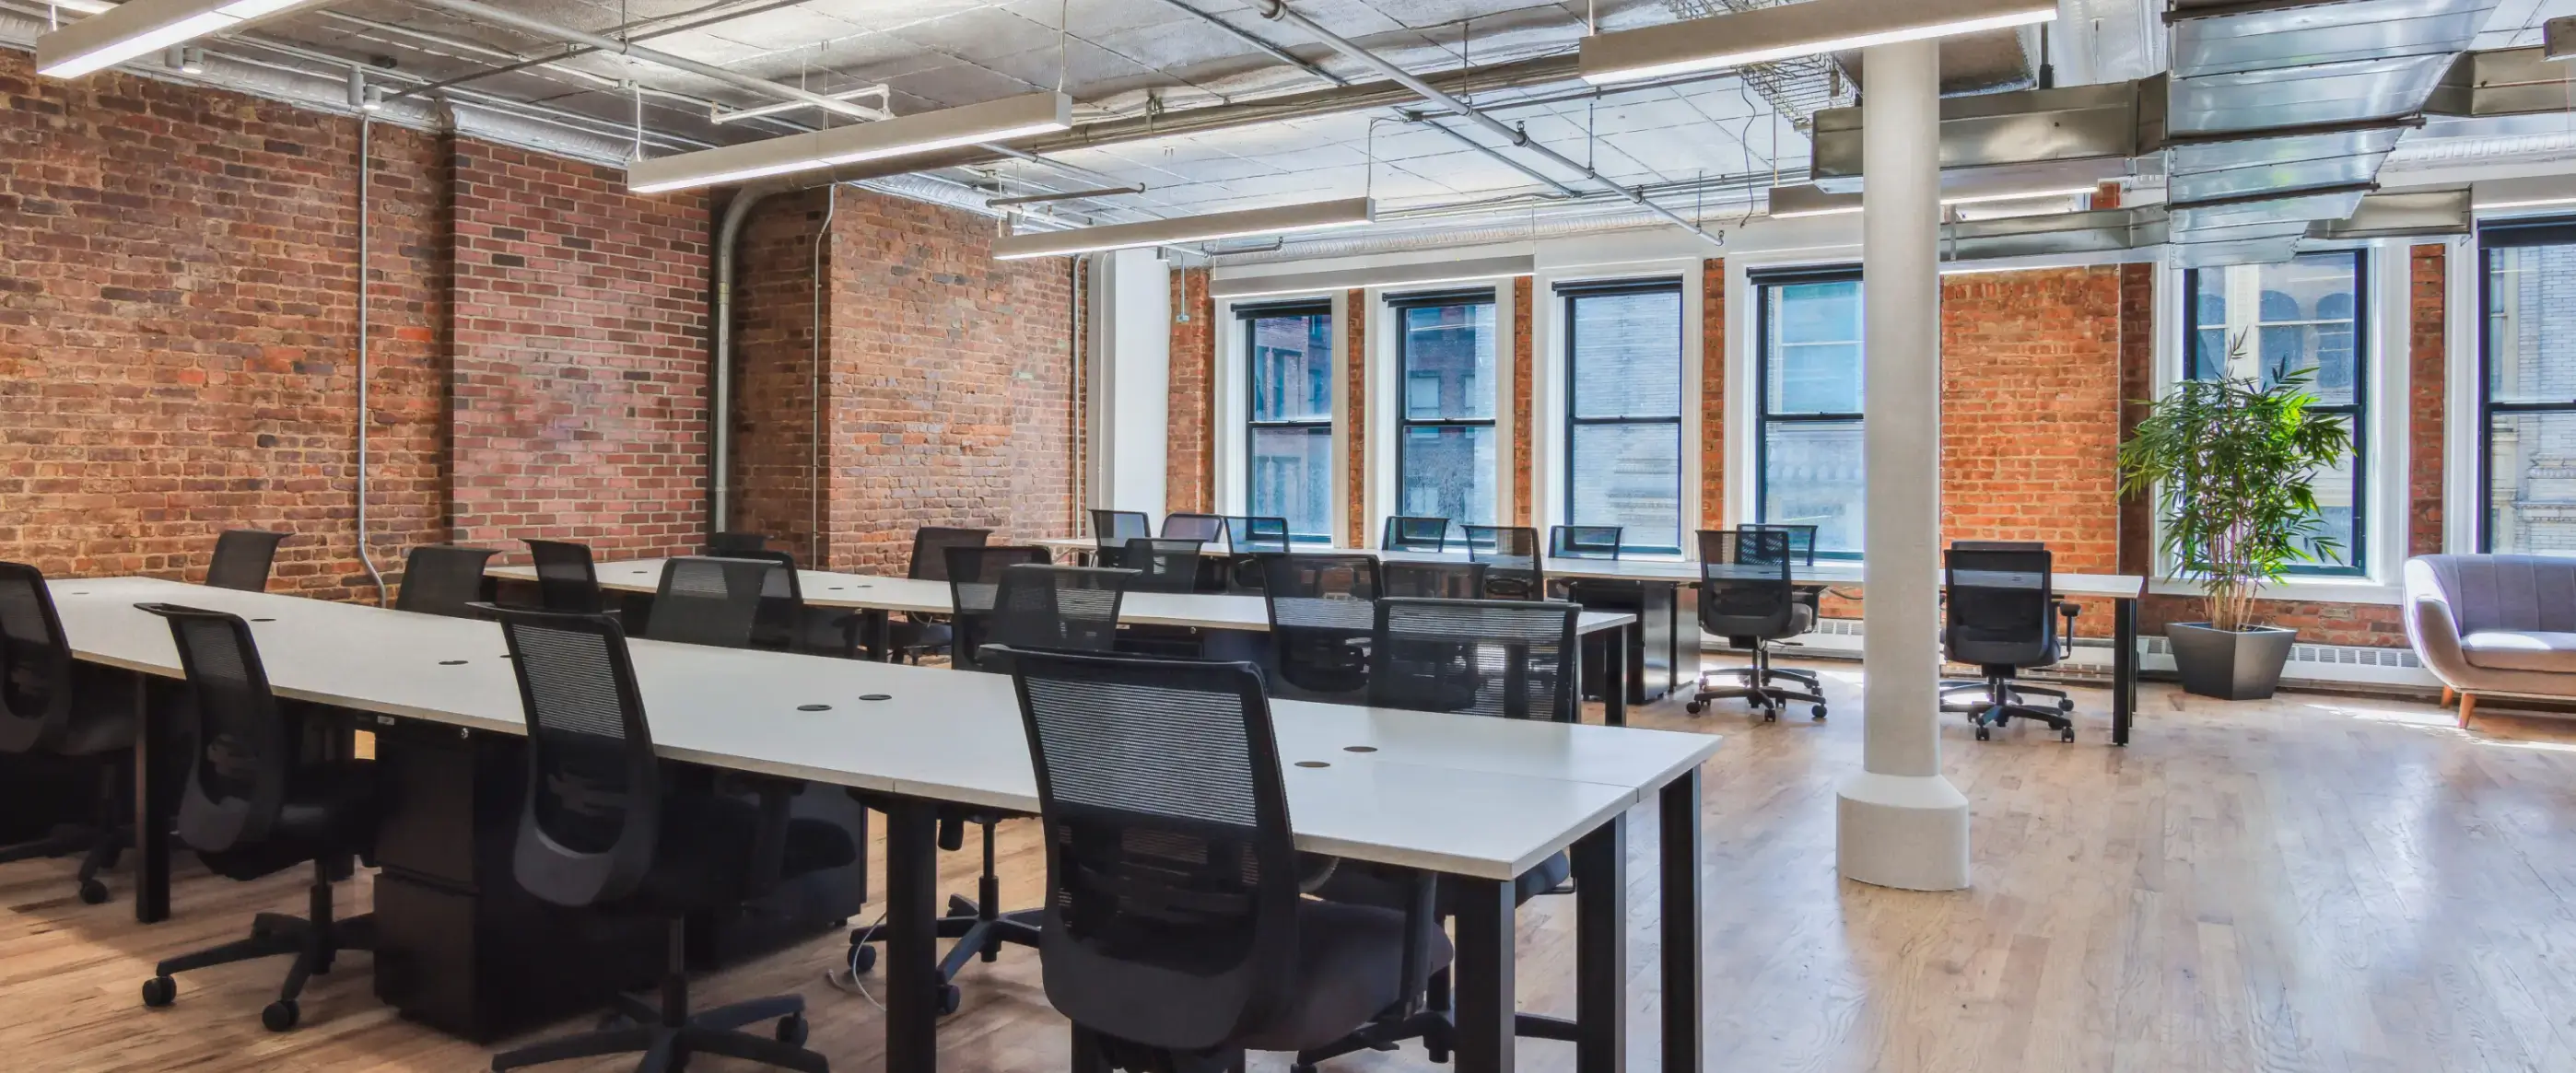 Large, open coworking space with rows of desks and chairs. Beautiful brick walls and large windows surround.